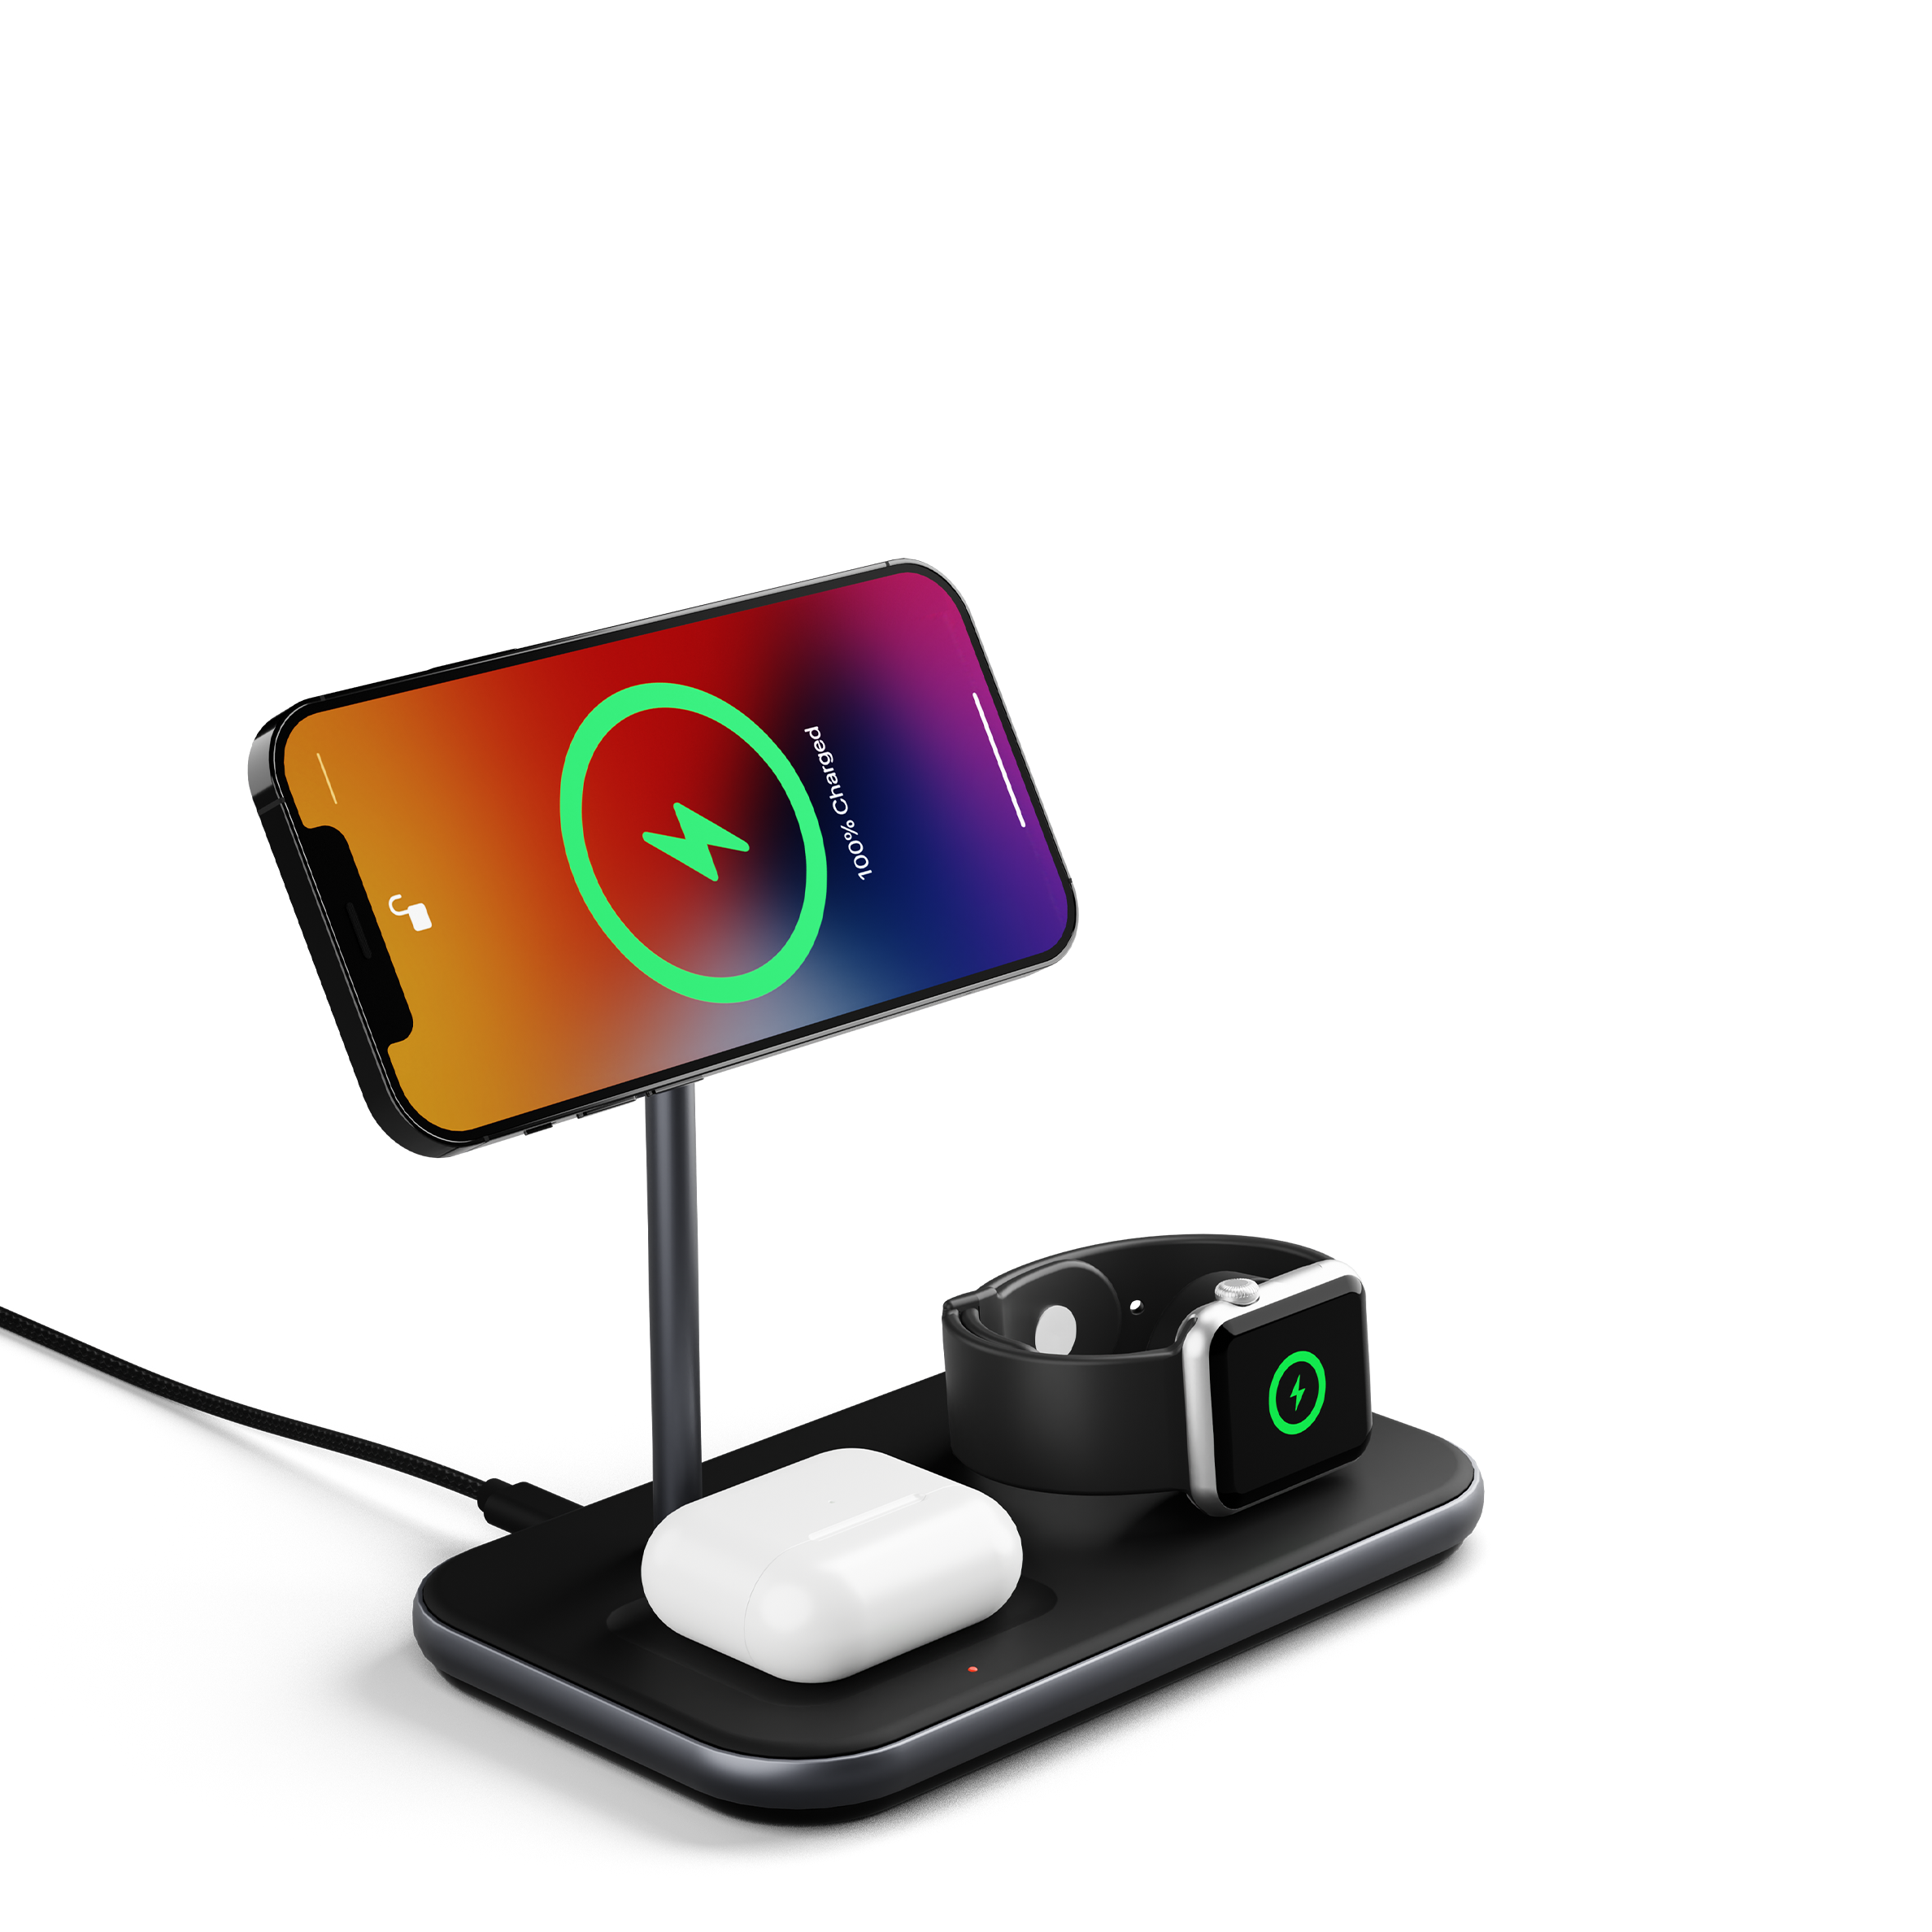 3-in-1 Magnetic Wireless Charger - Cygnett (AU)